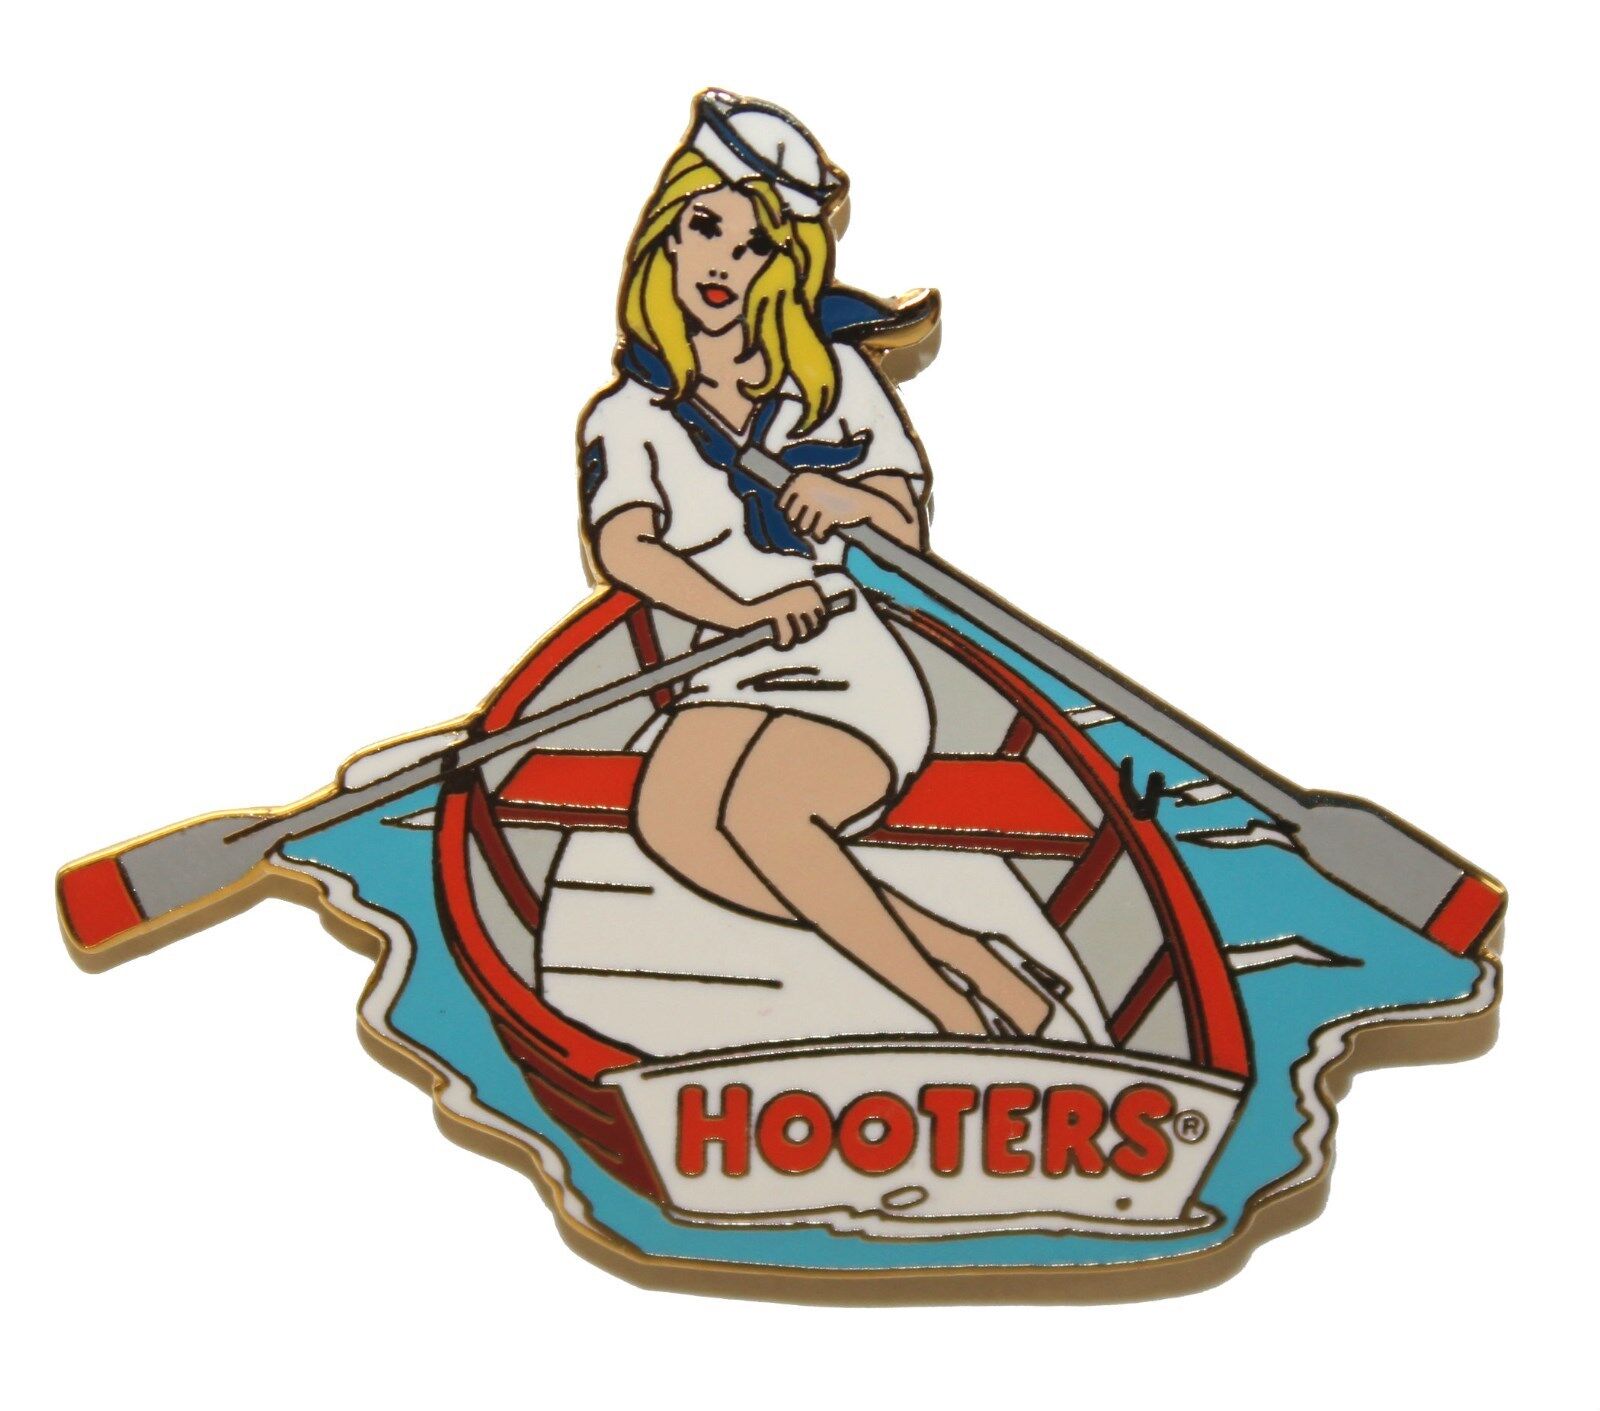 HOOTERS RESTAURANT NAVY GIRL IN ROWBOAT BOAT ON LAKE PADDLE MILITARY LAPEL PIN